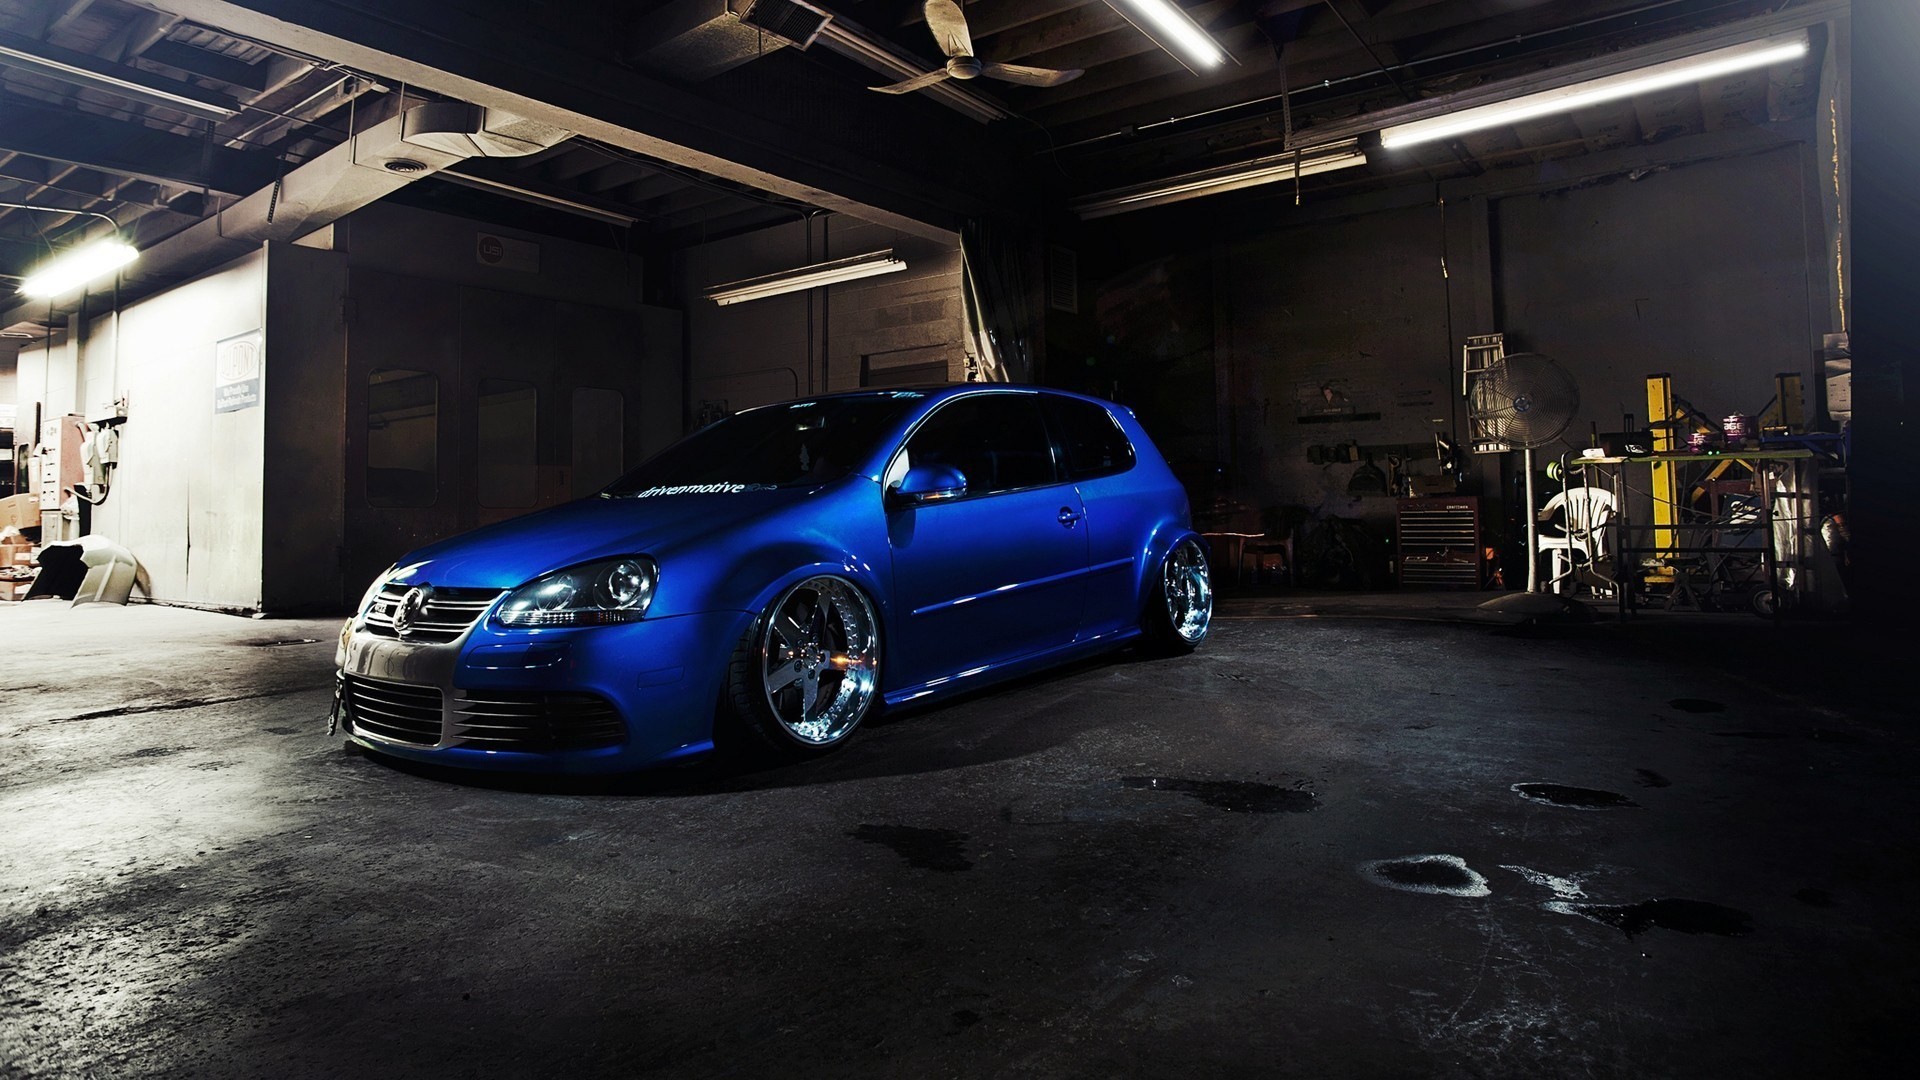 1920x1080 Download Volkswagen Golf R32 Photo pictures in high definition or .